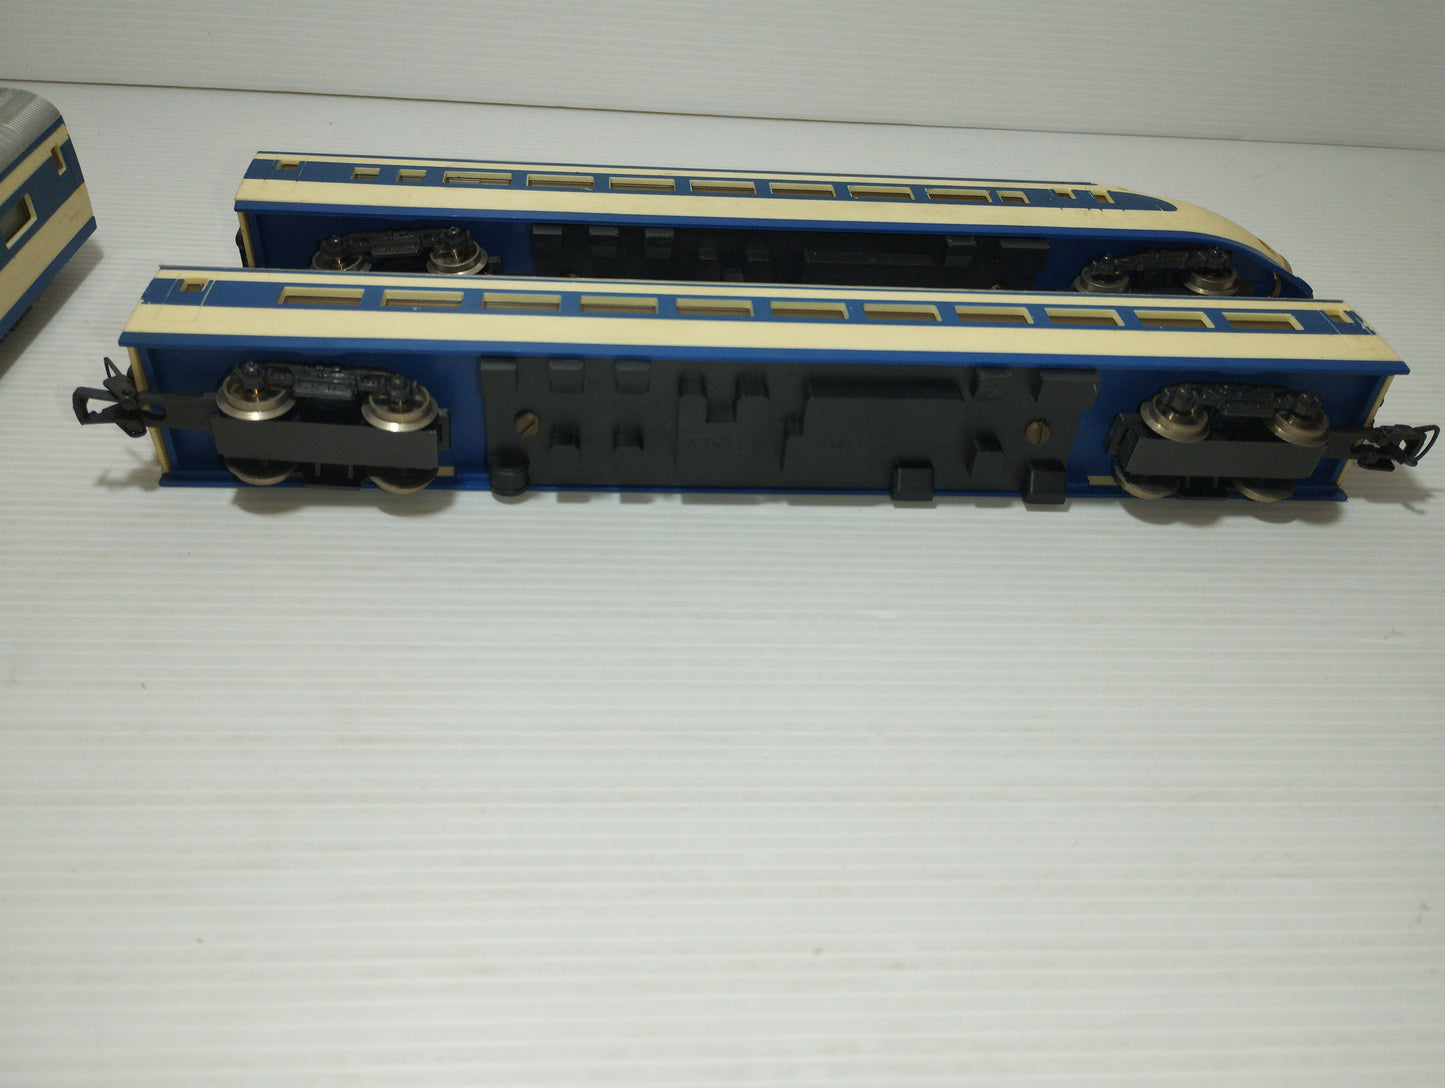 Treno Lima
Made in Italy
Vintage